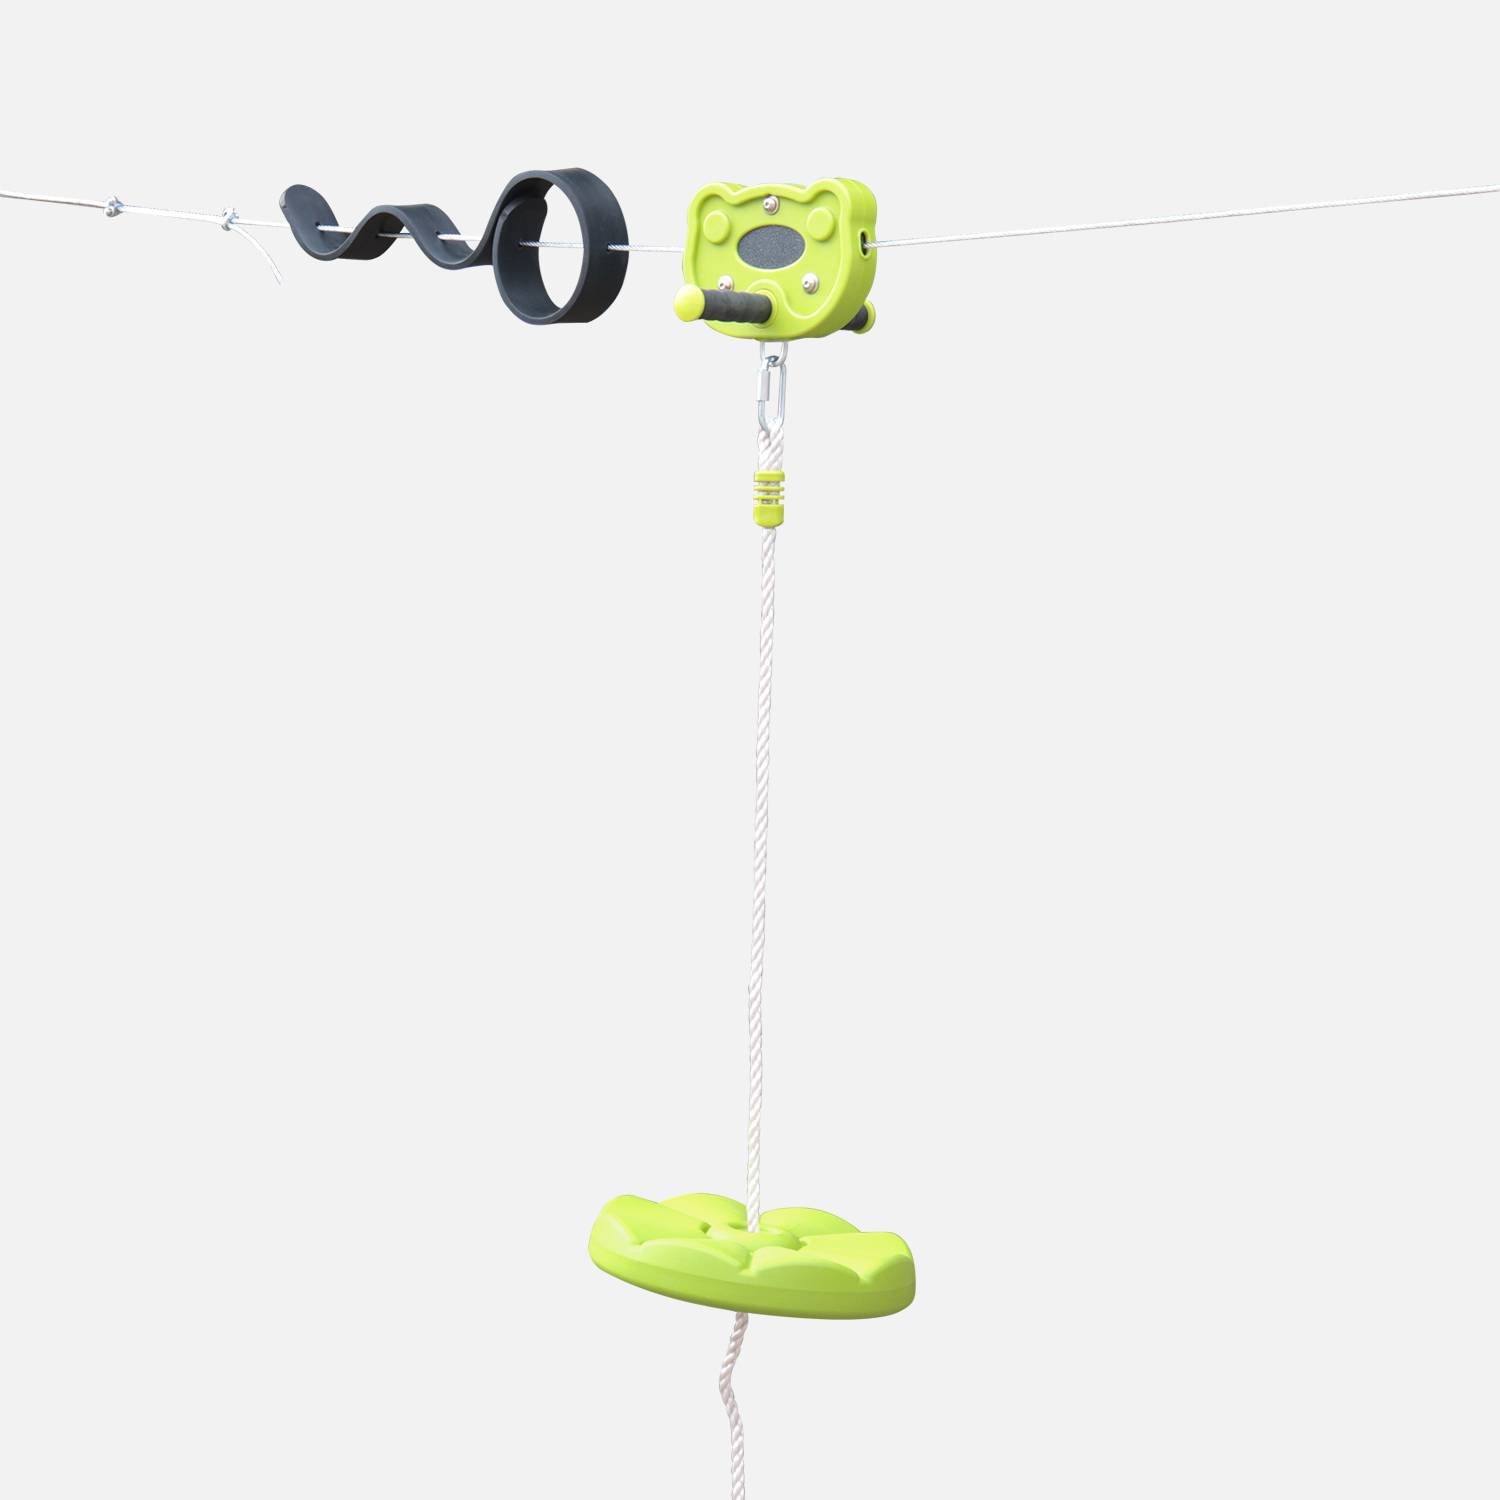 Zip line for children, 30m long with disc swing, anti-slip handles, cushioning system - Alize Photo1